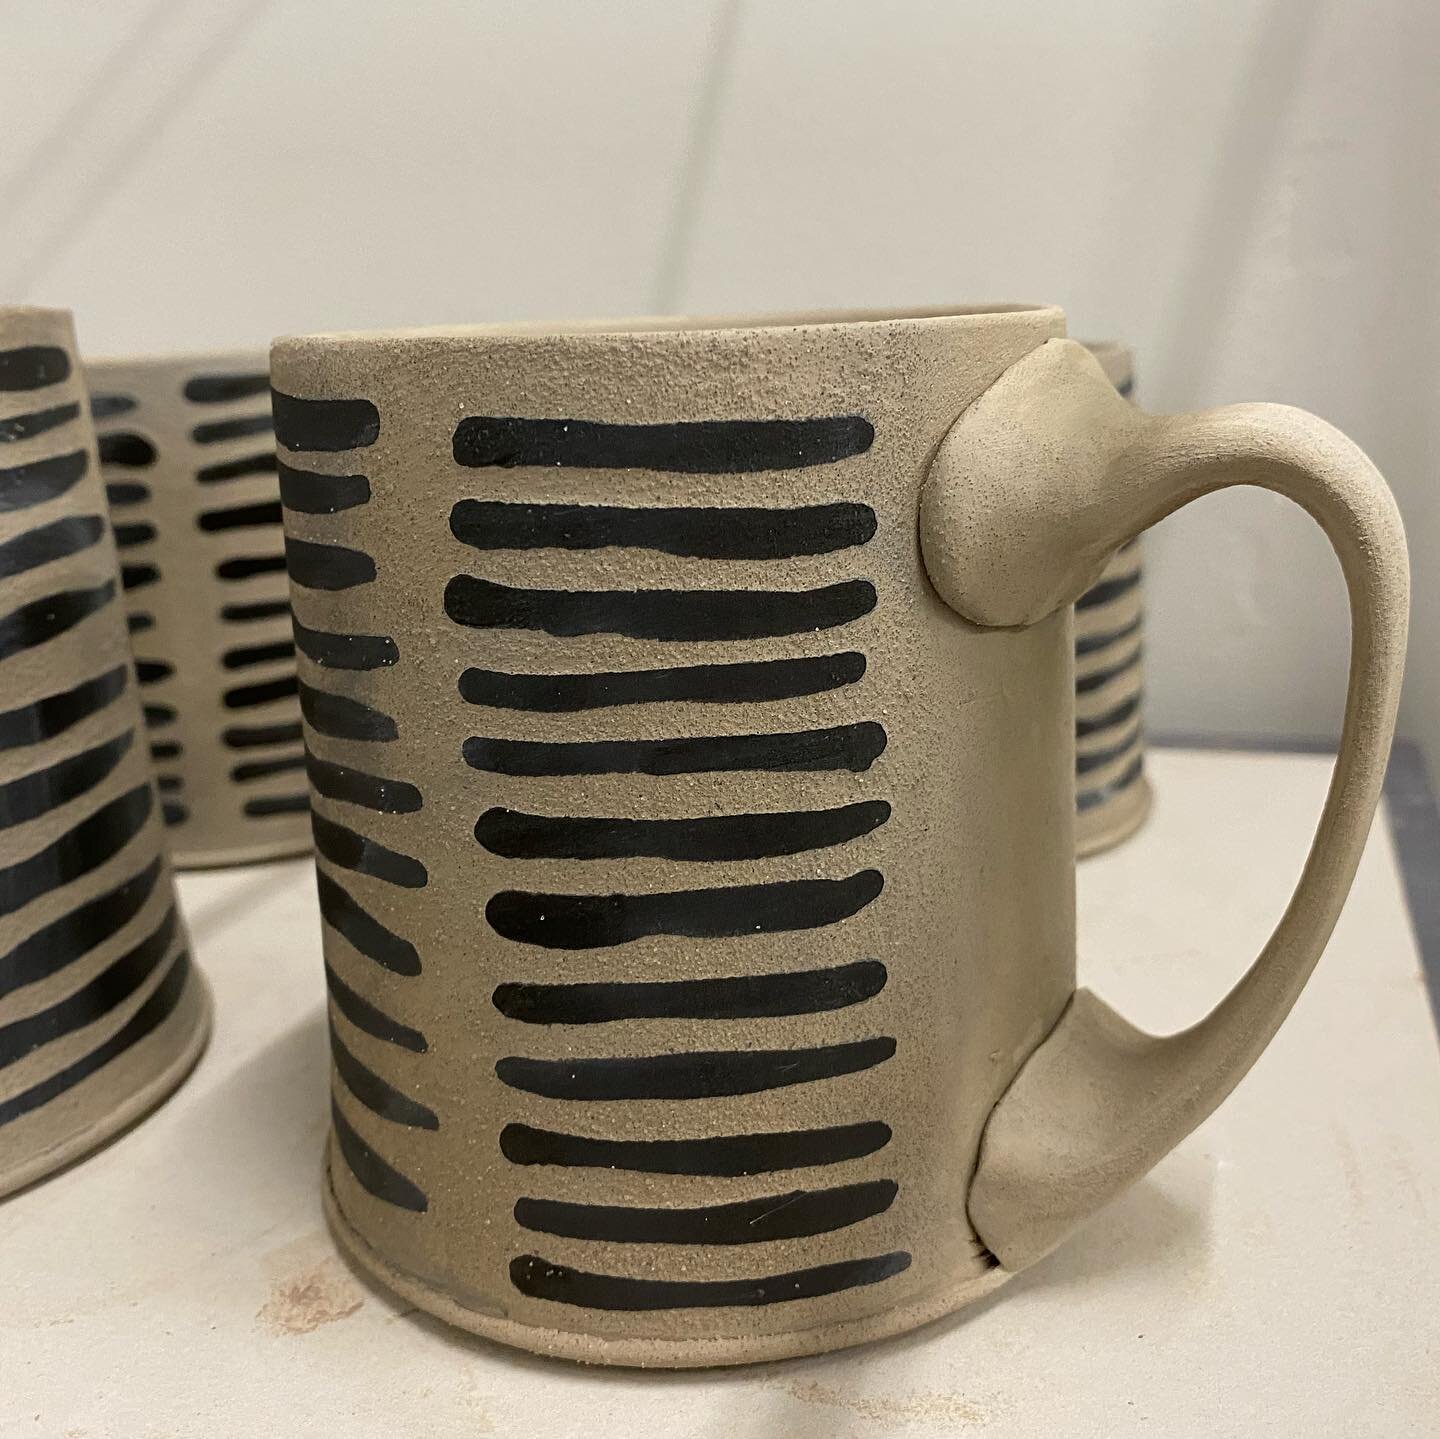 Mugs in progress. Water etching with black underglaze and shellac for some raised surface texture. 
#tobedetermined 
#clay #mugs #pottery #function #wip #wateretched 
#midwestclayproject